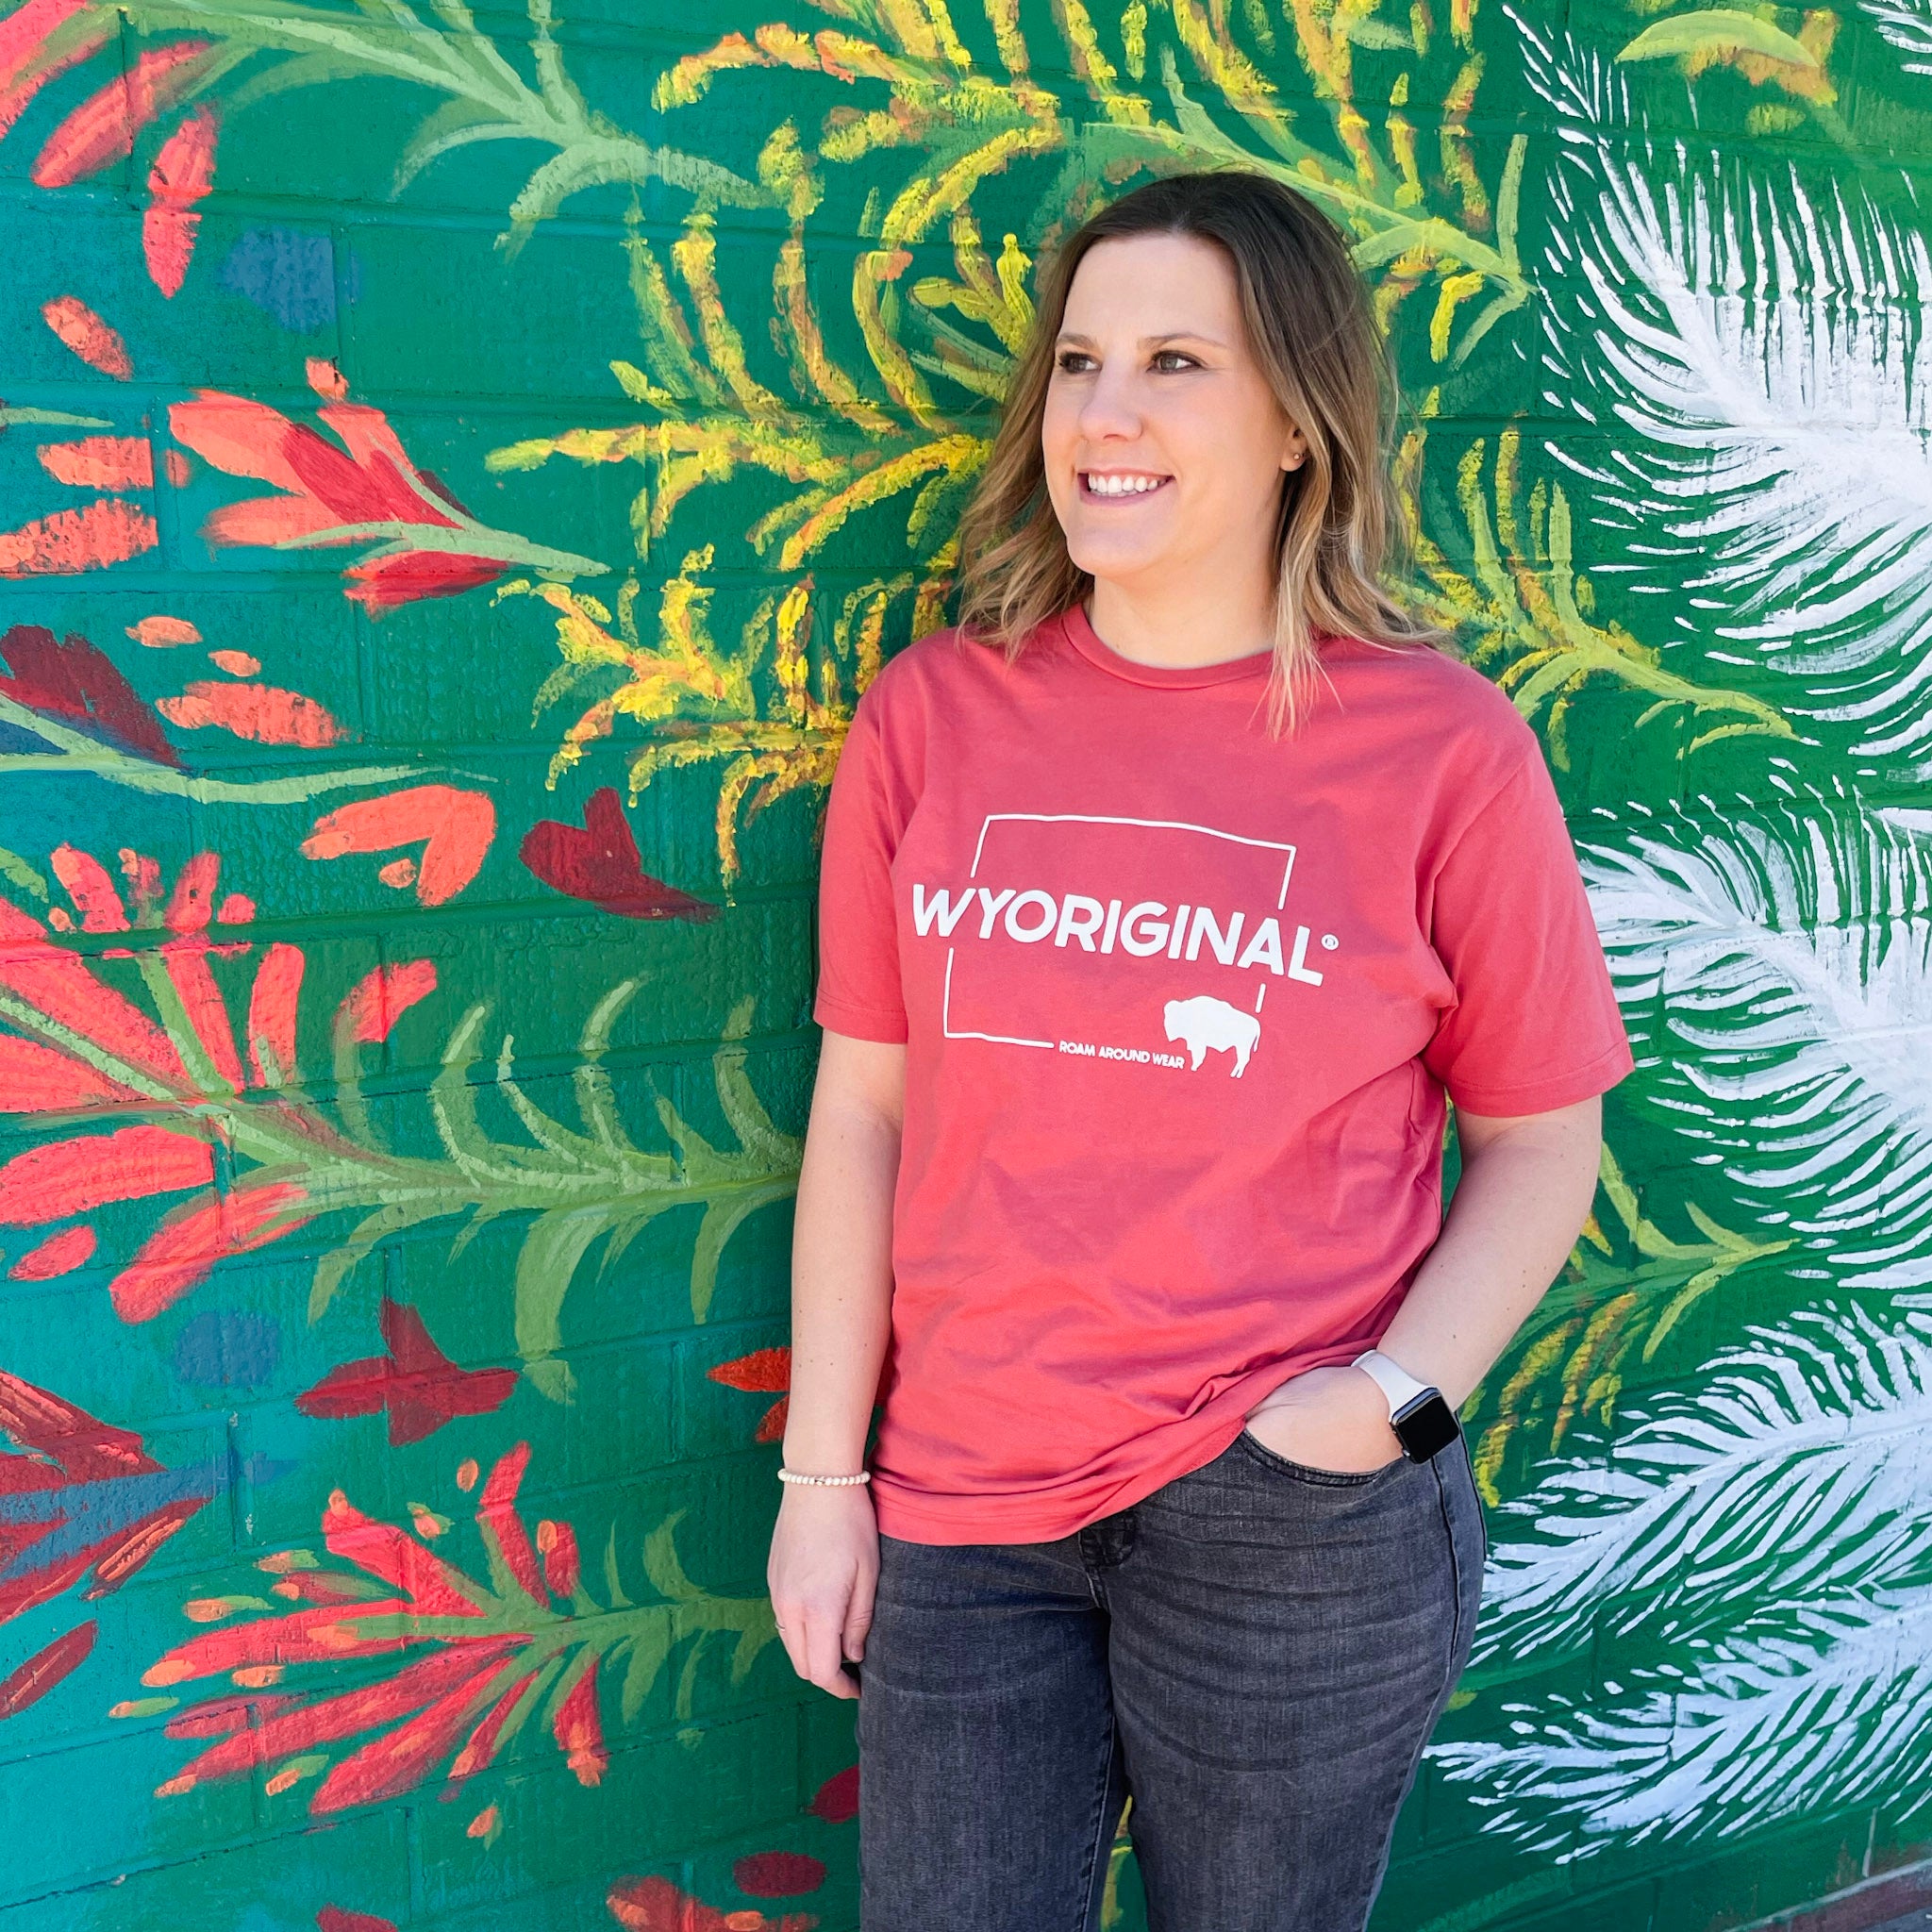 Wyoriginal Square State design in white on red/orange shirt. Roam Around Wear is a women owned Wyoming T-Shirt company based out of Gillette, Wyoming.